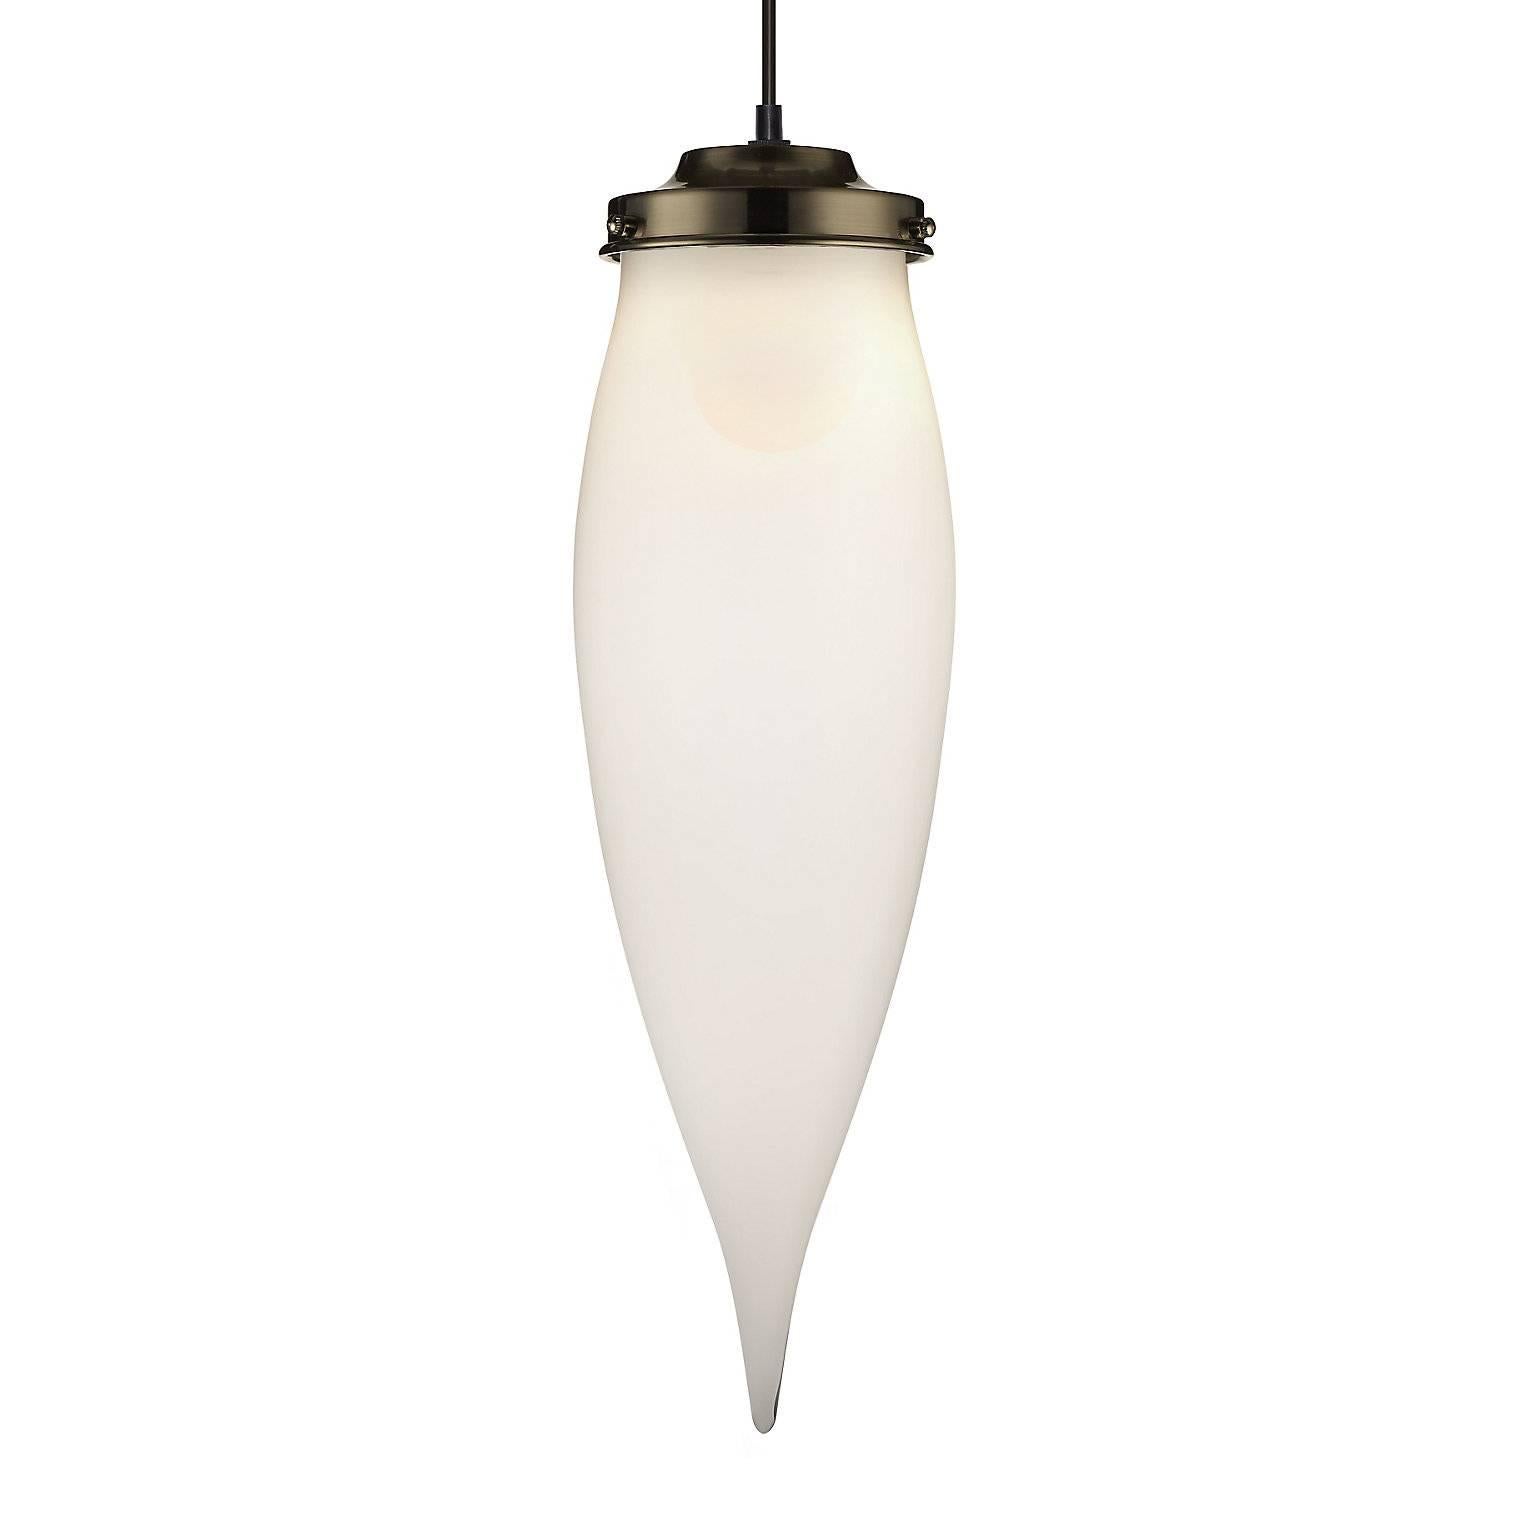 American Pointelle Petite Torrent Handblown Modern Glass Pendant Light, Made in the USA For Sale